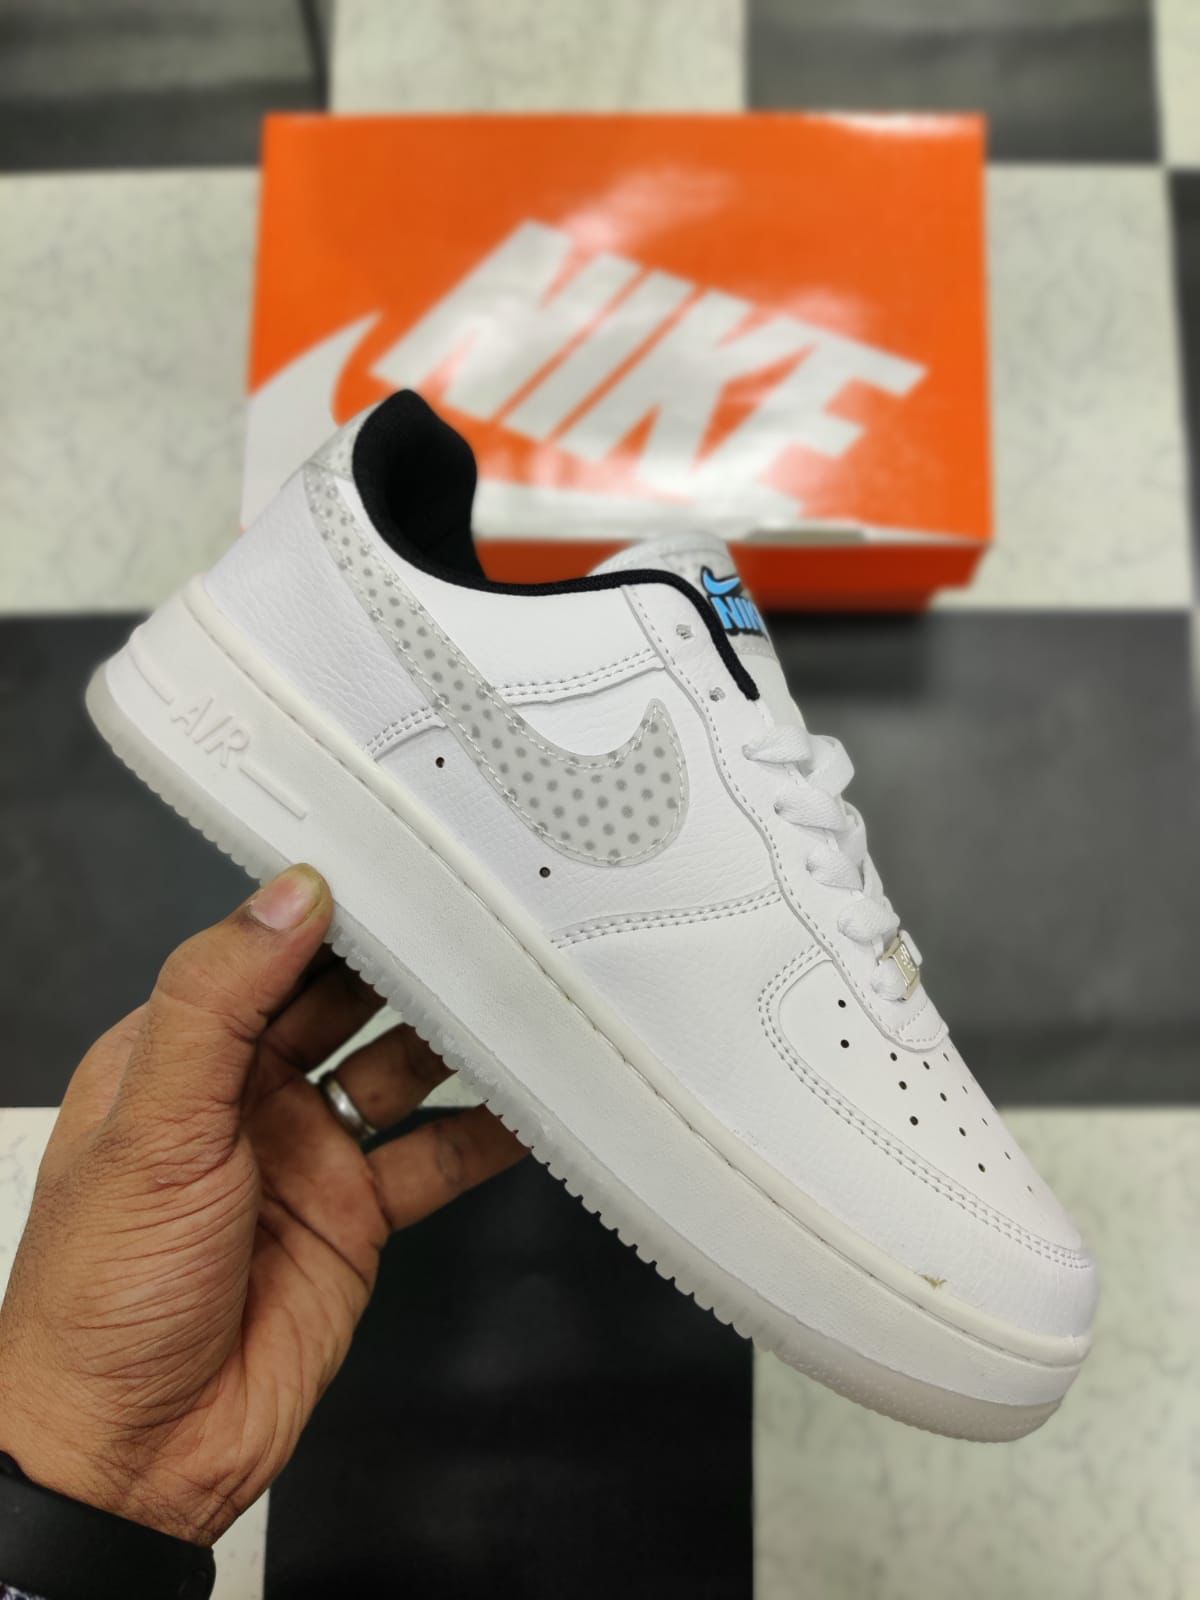 Airforce 1 Naked Eye Sneakers In Stock